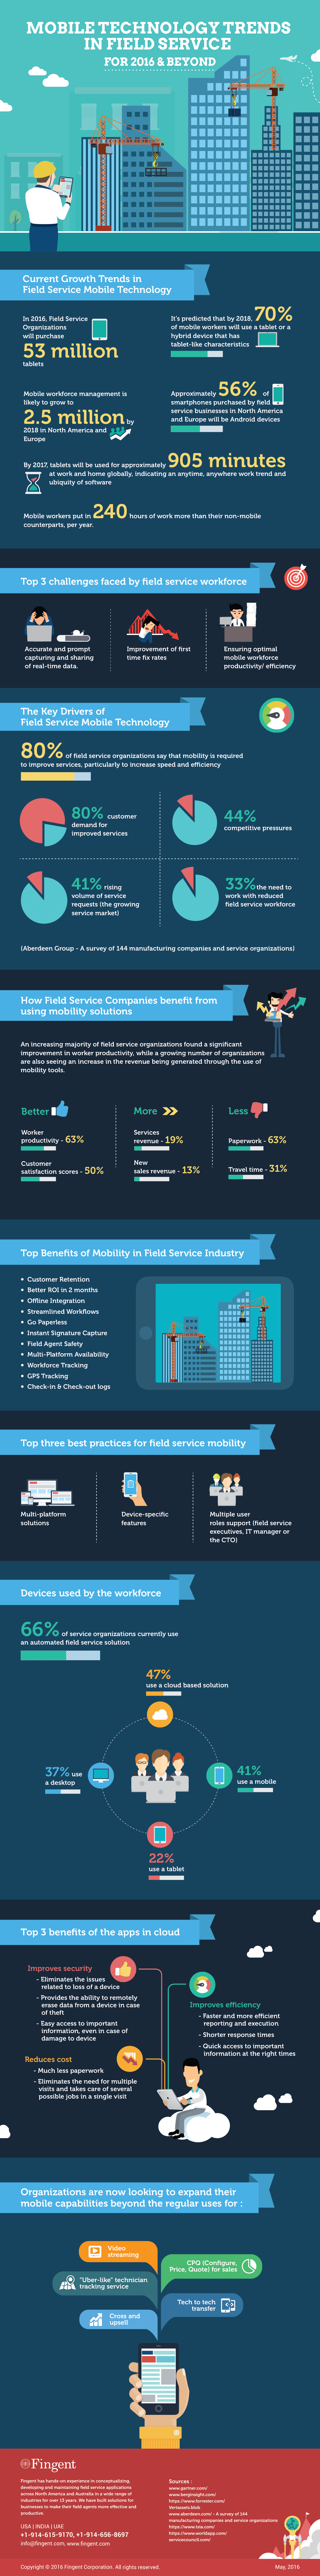 FIELD SERVICE MOBILITY TRENDS FOR 2016 & BEYOND 